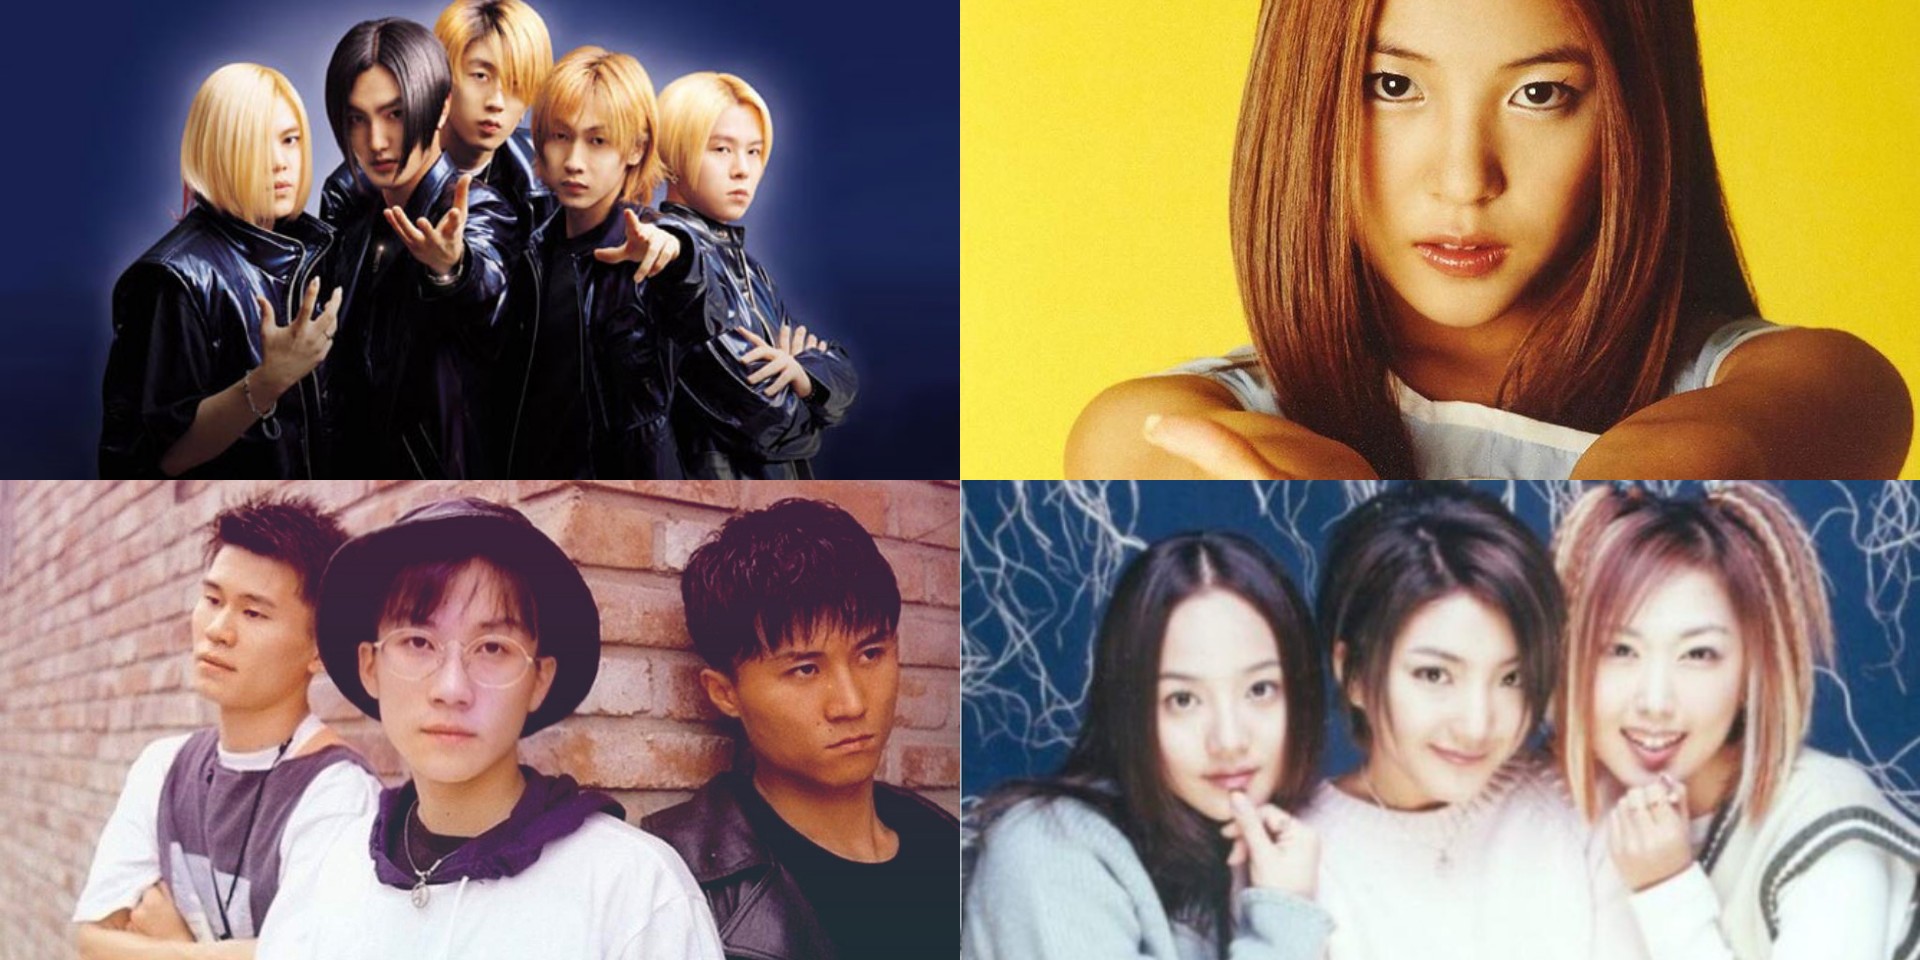 Bandwagon's guide to K-pop pioneers: Seo Taiji and Boys, H.O.T., BoA, SES, and more